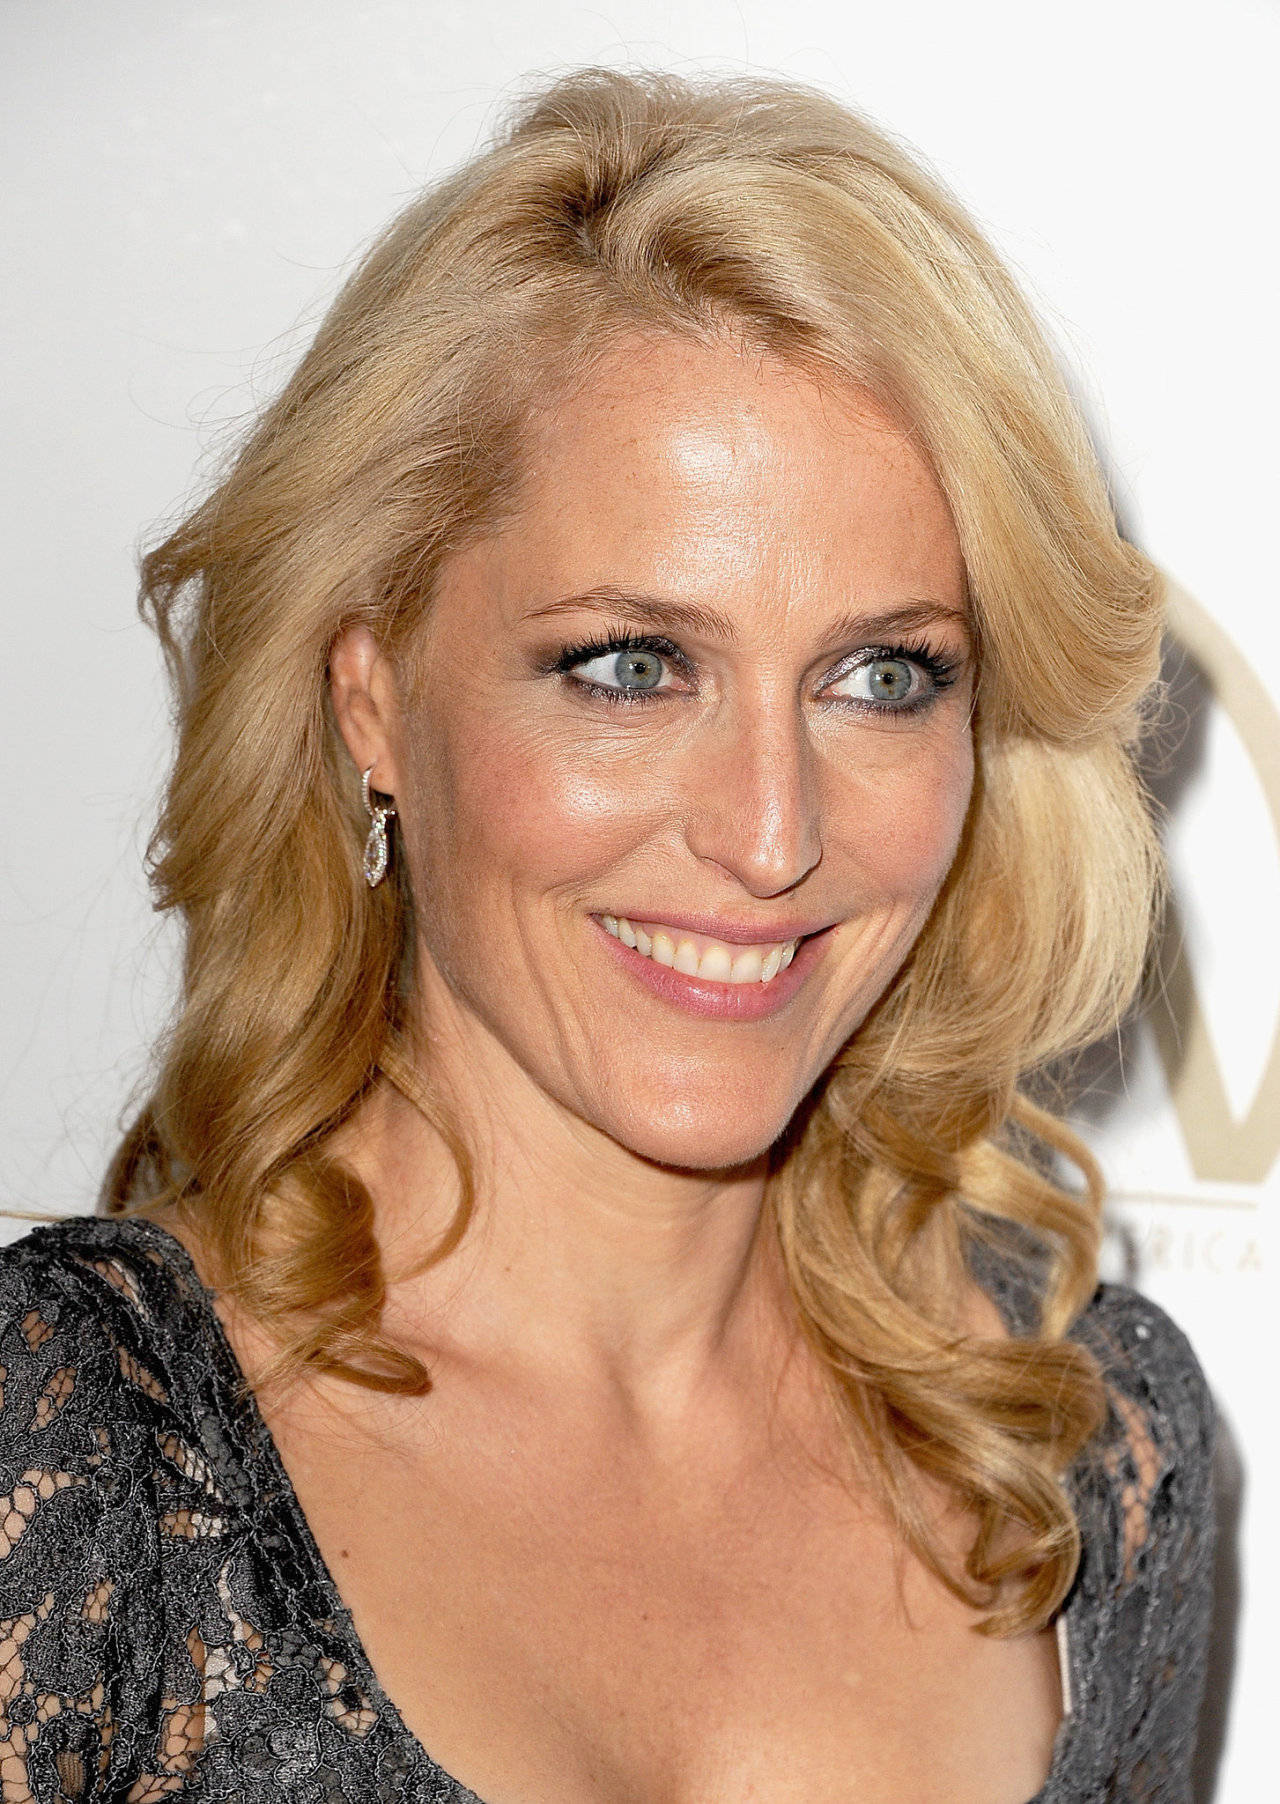 Caption: Gillian Anderson showcasing a curly blonde hairstyle. Wallpaper